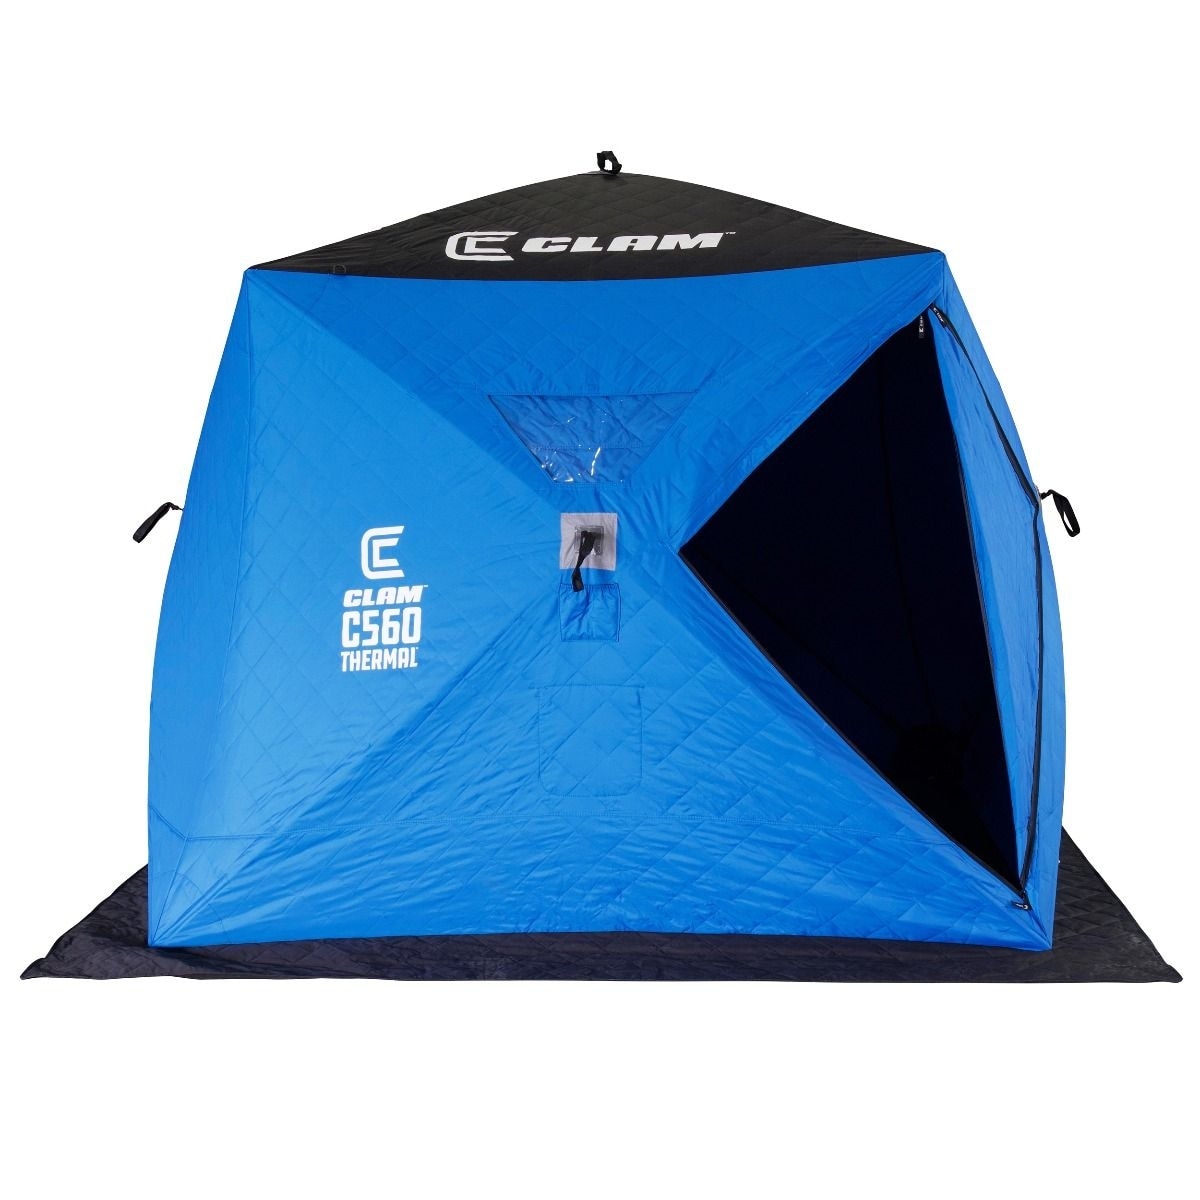 CLAM C-560 Portable 7.5 Ft 4 Person Pop Up Ice Fishing Thermal Hub Shelter Tent - Blue - 40